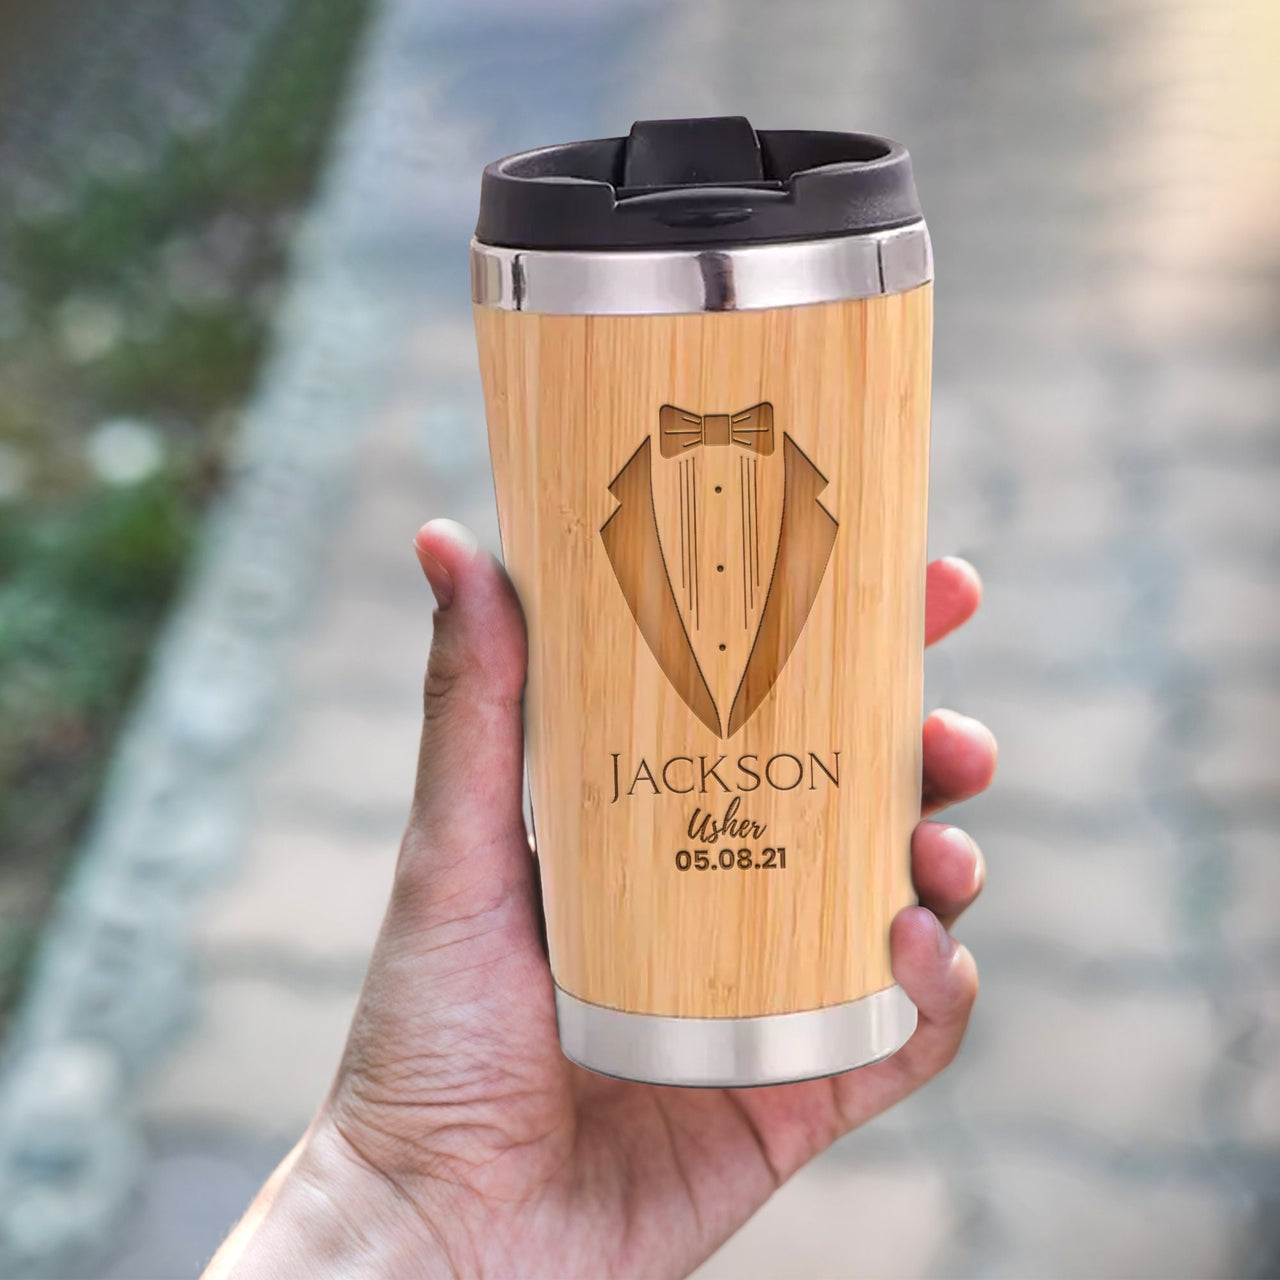 Engraved Bamboo Tumblers - Perfect for Groomsmen Proposal and Wedding Gifts